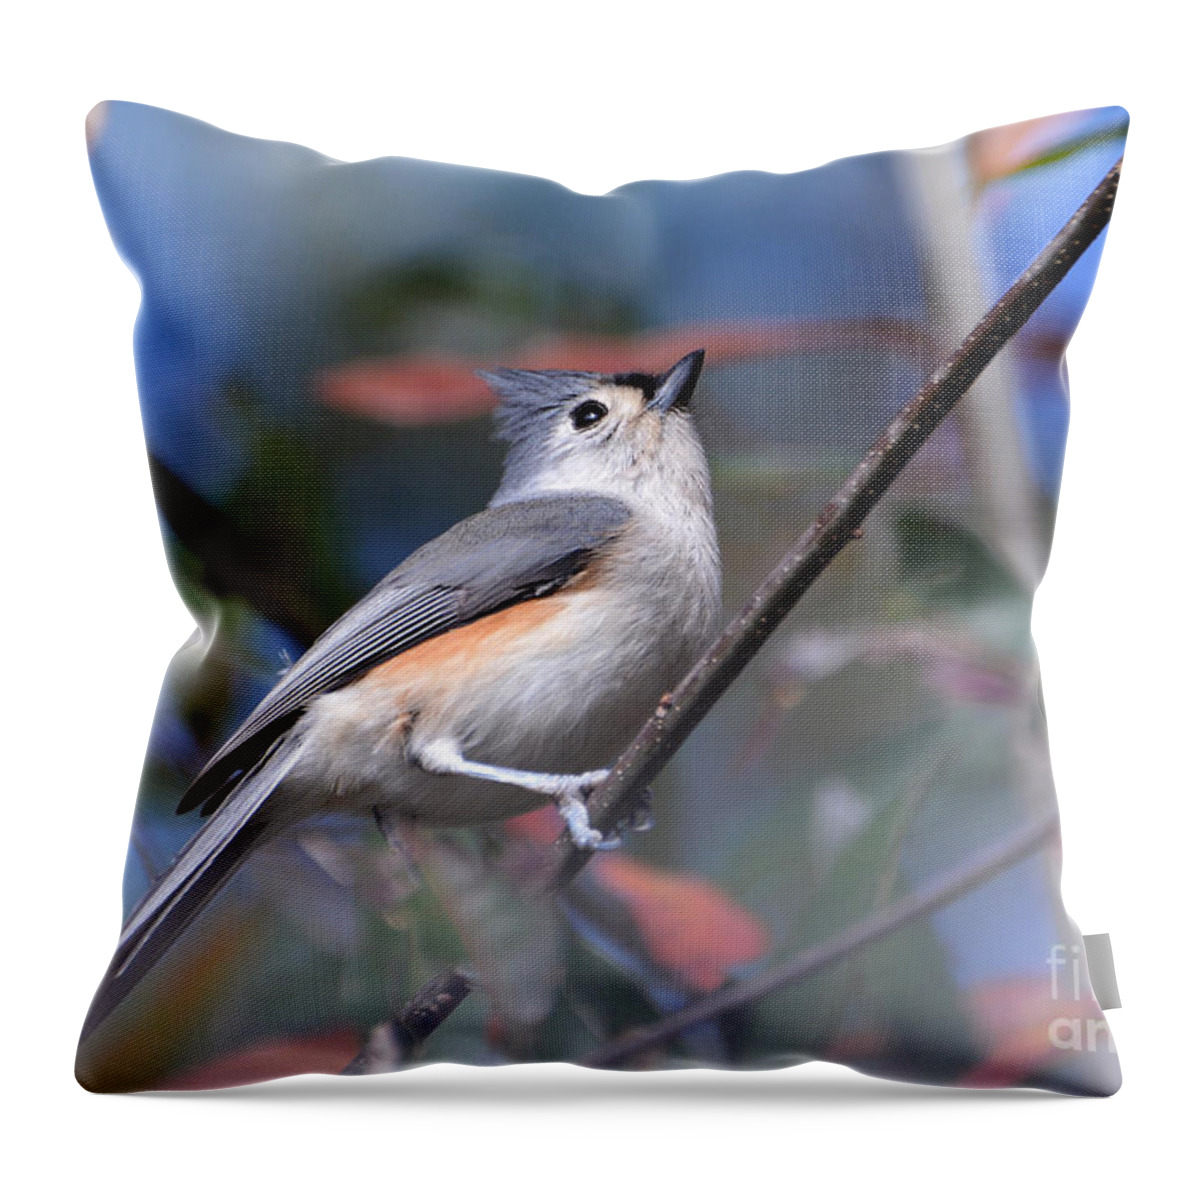 Birds Throw Pillow featuring the photograph Little Tufted Titmouse by Kathy Baccari